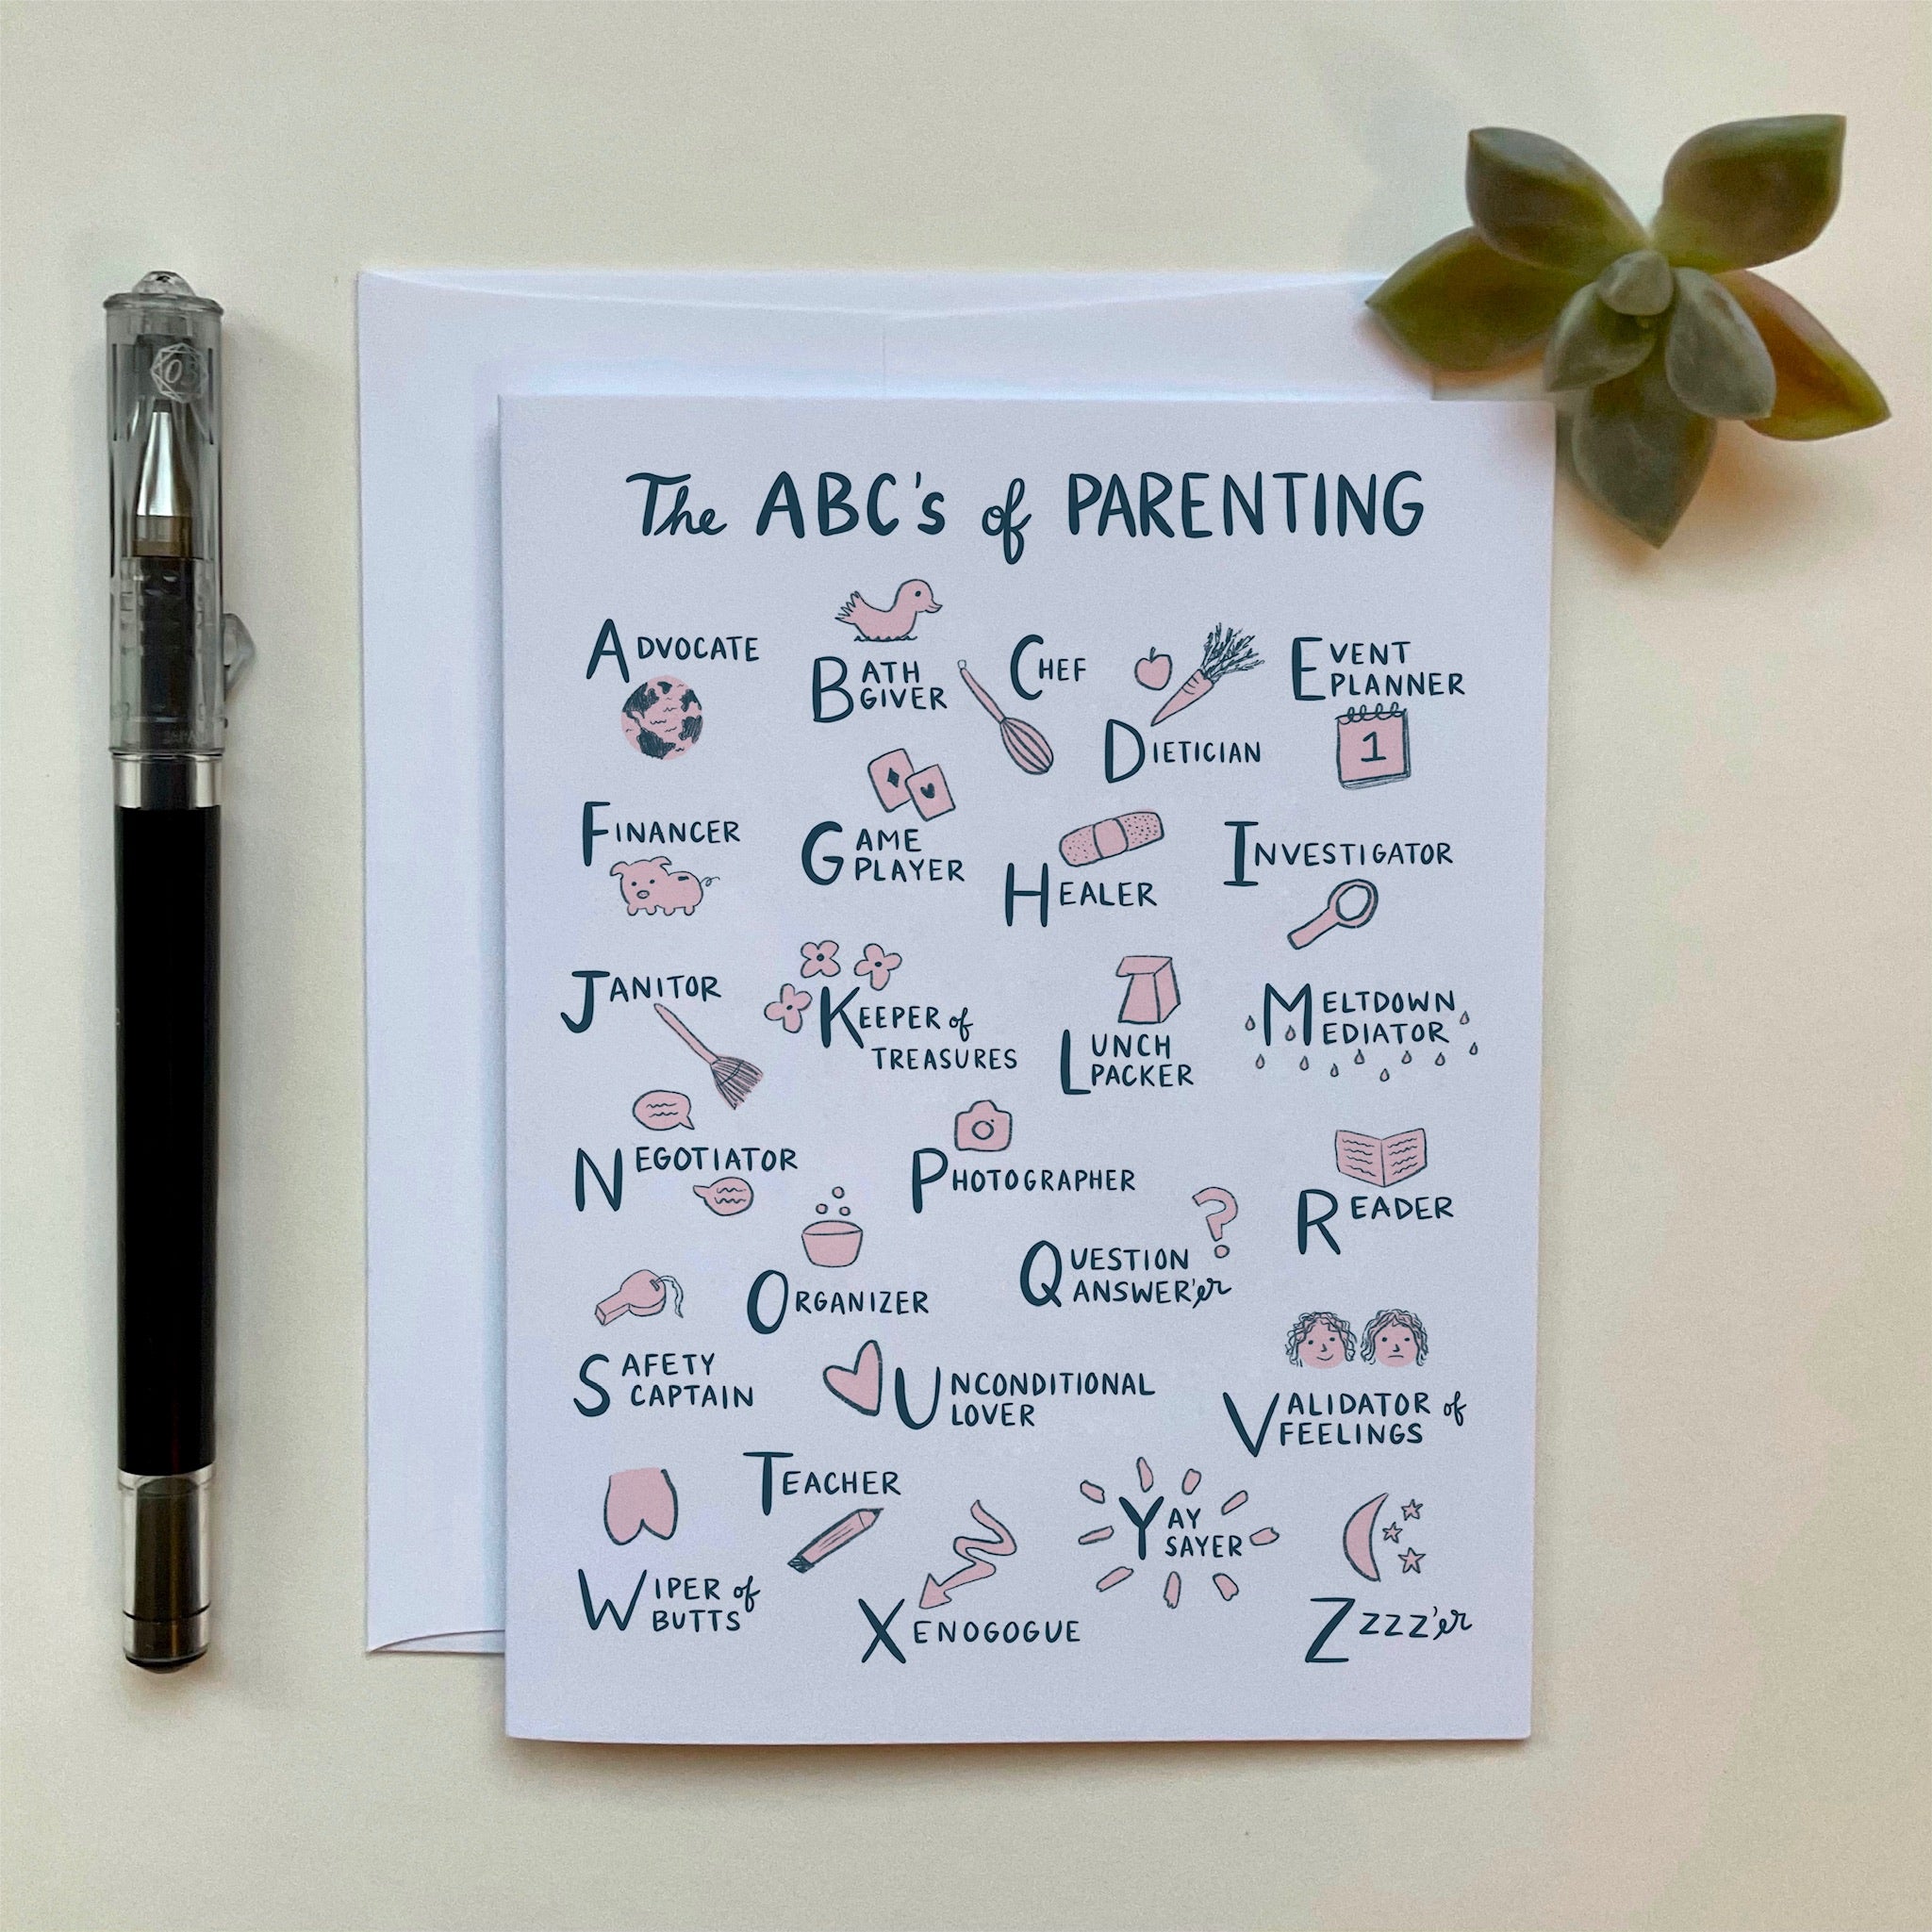 The ABC's of Parenting